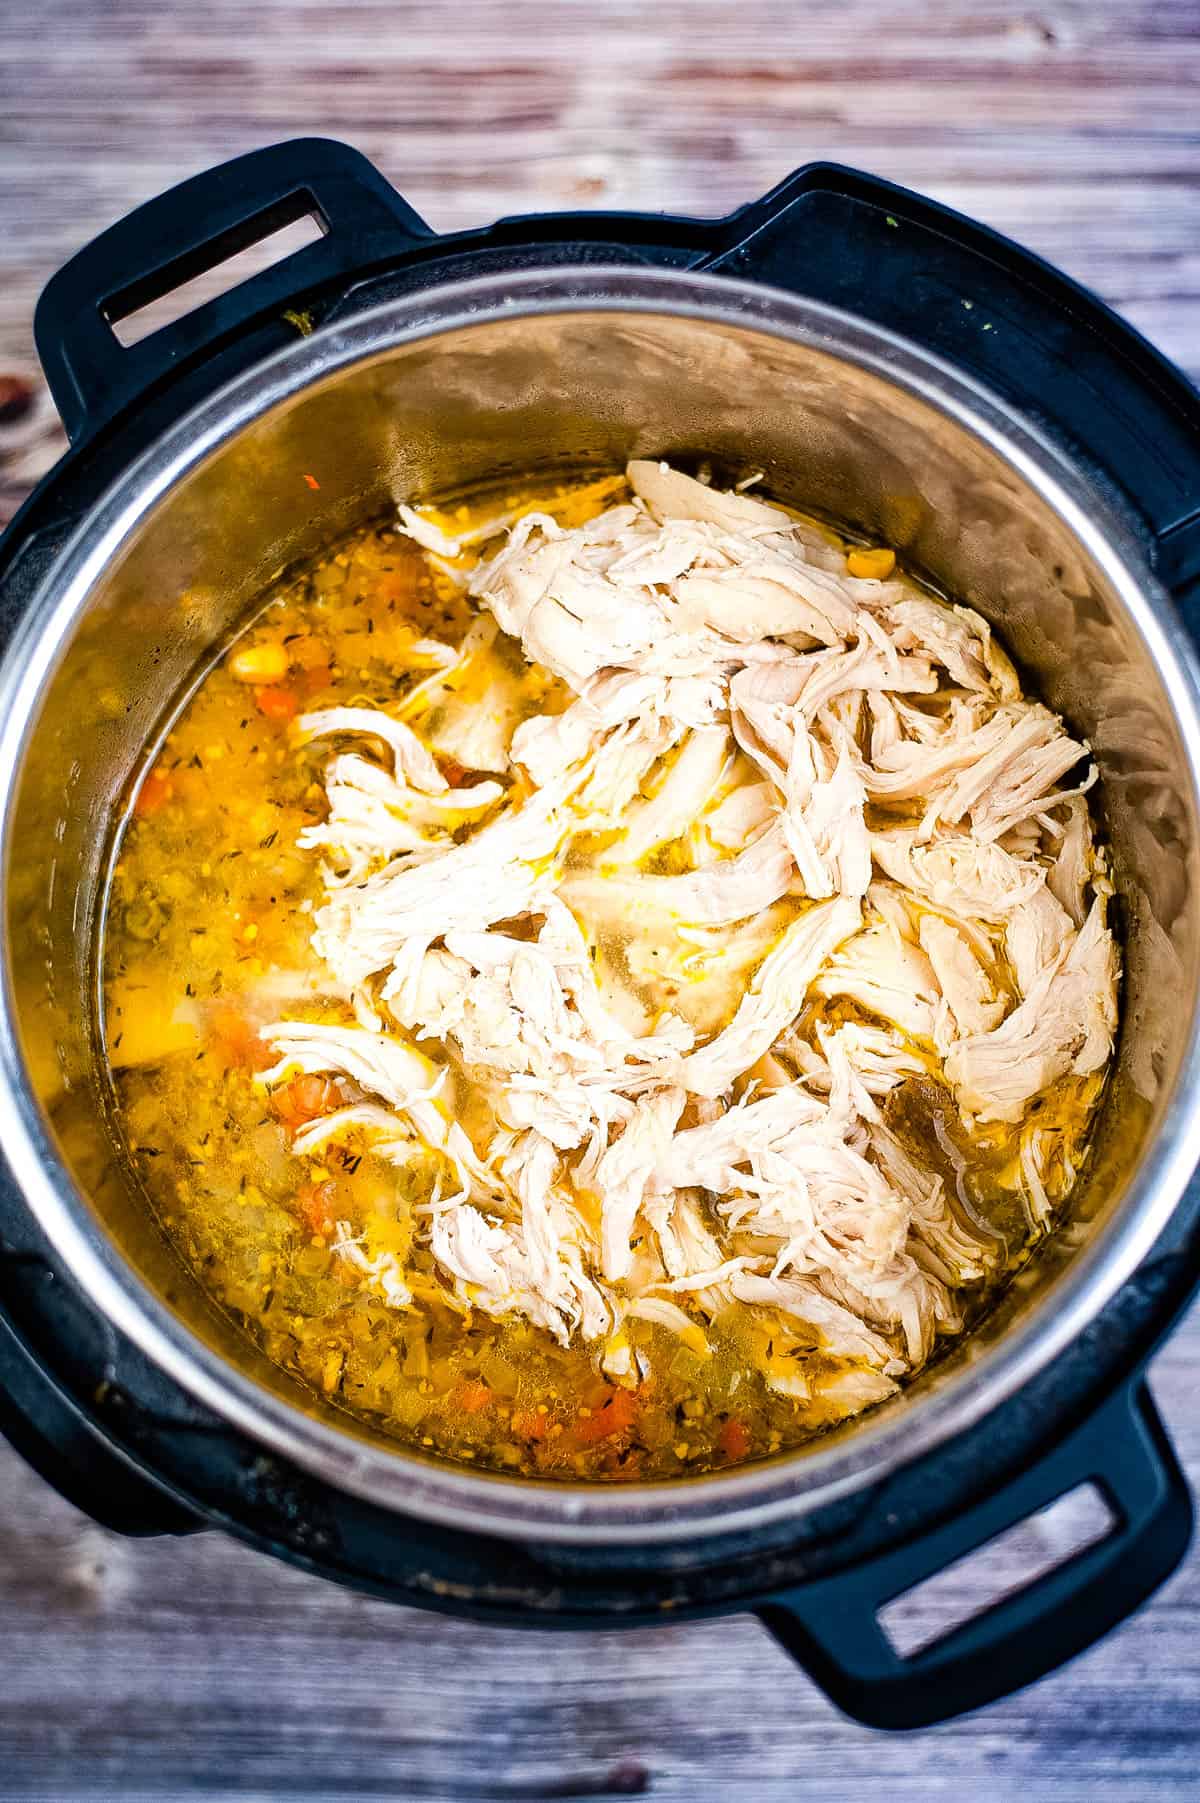 A homemade chicken pot pie soup made quickly in an instant pot, served on a rustic wooden table.